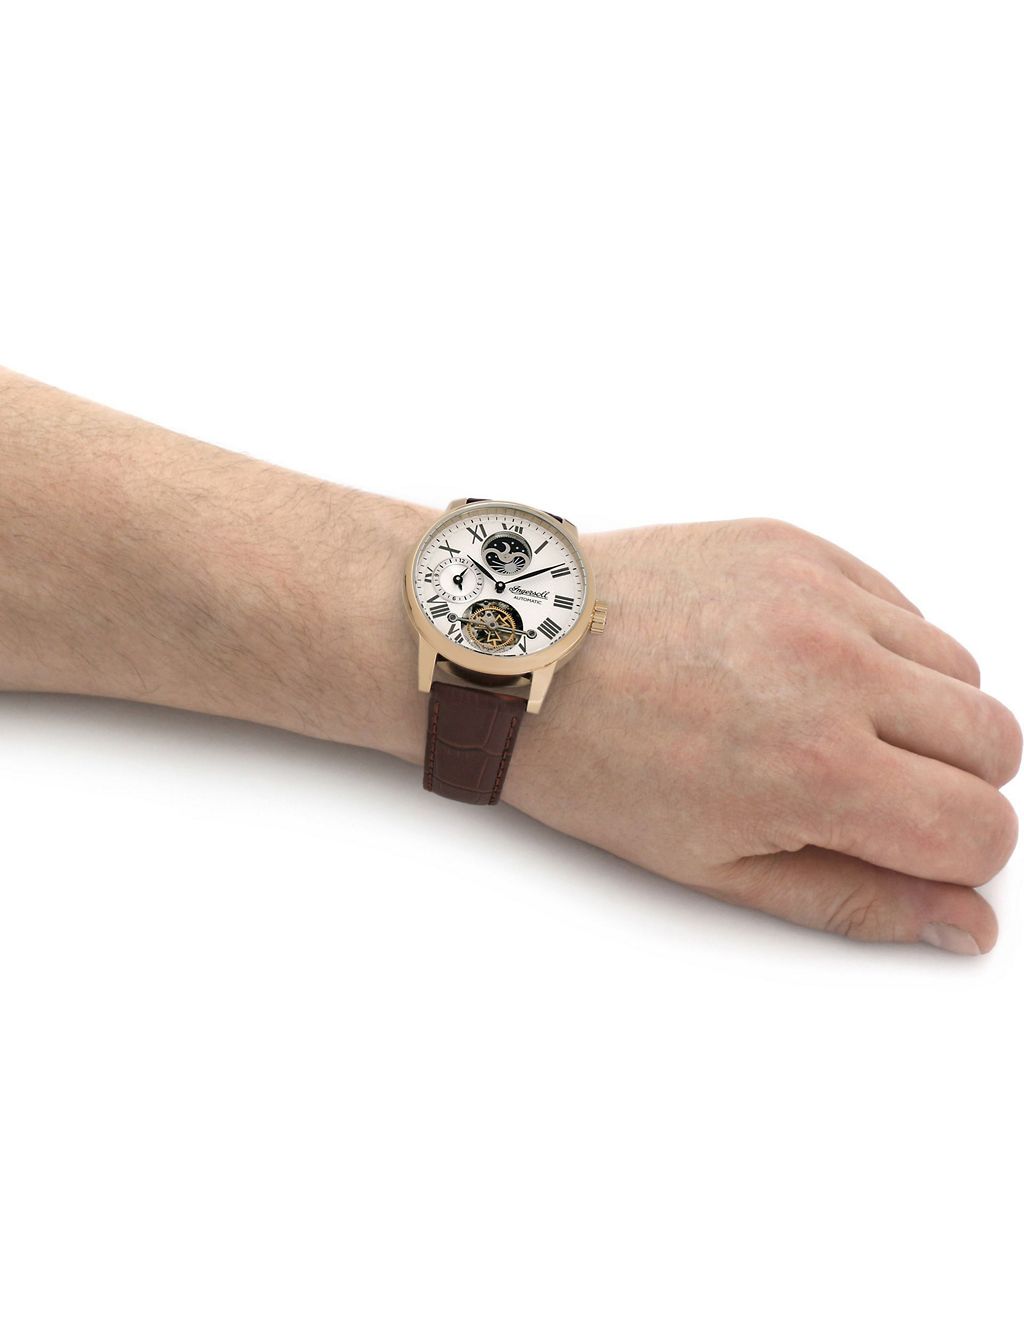 Ingersoll Riff Brown Leather Automatic Watch 1 of 4